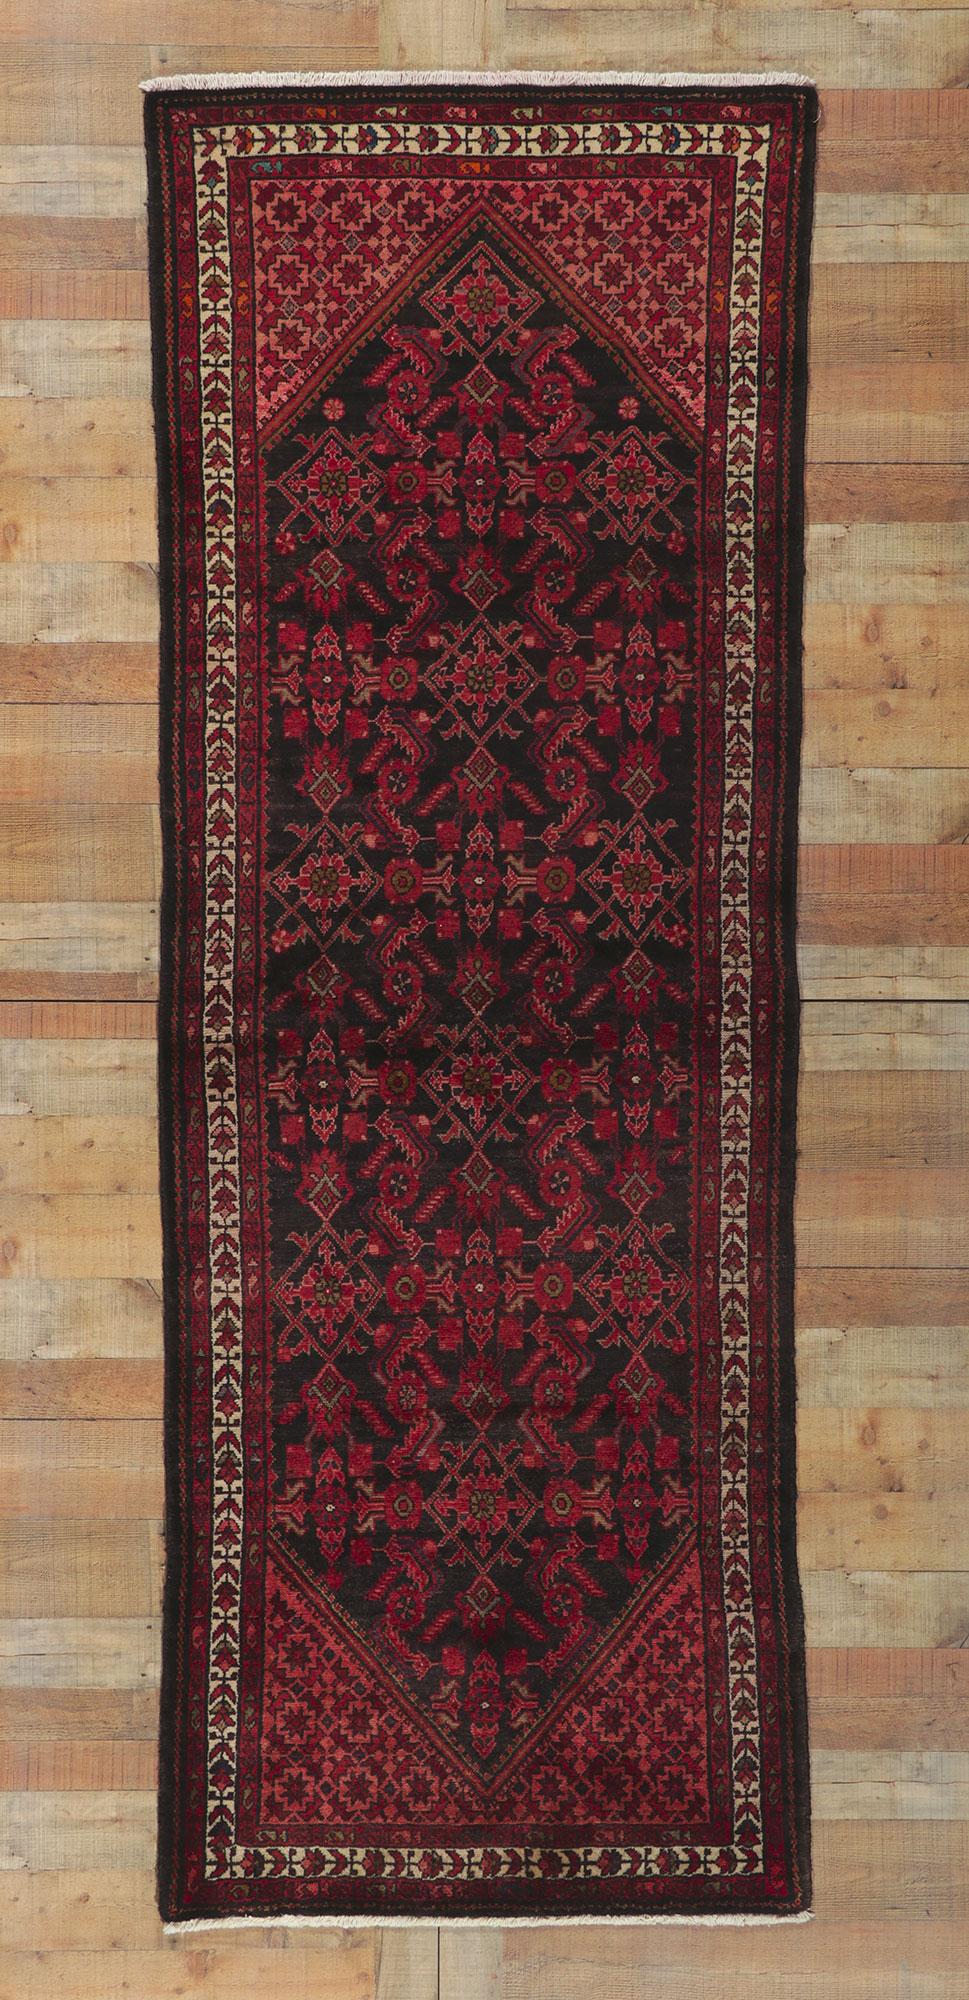 Vintage Persian Malayer Rug, Beguiling Charm Meets Dark & Moody For Sale 2